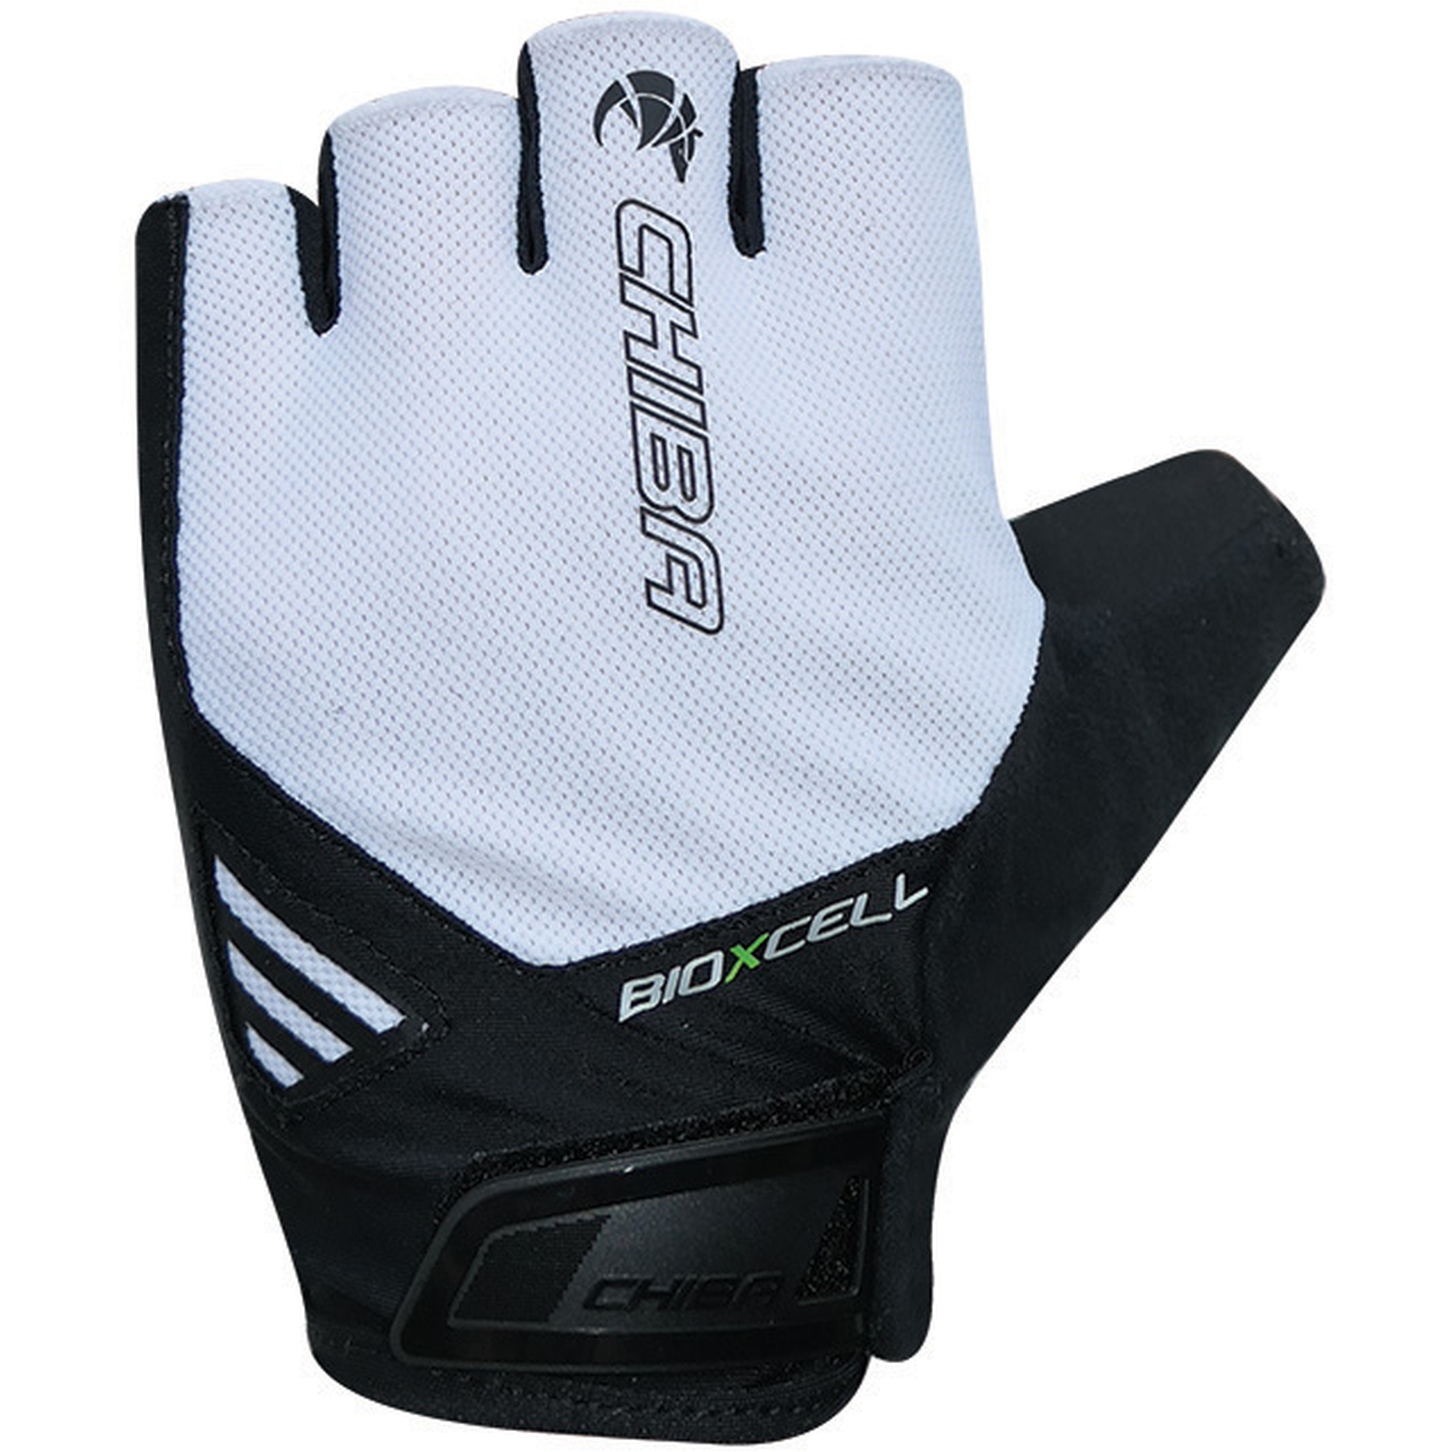 Picture of Chiba BioXCell Air Bike Gloves - white